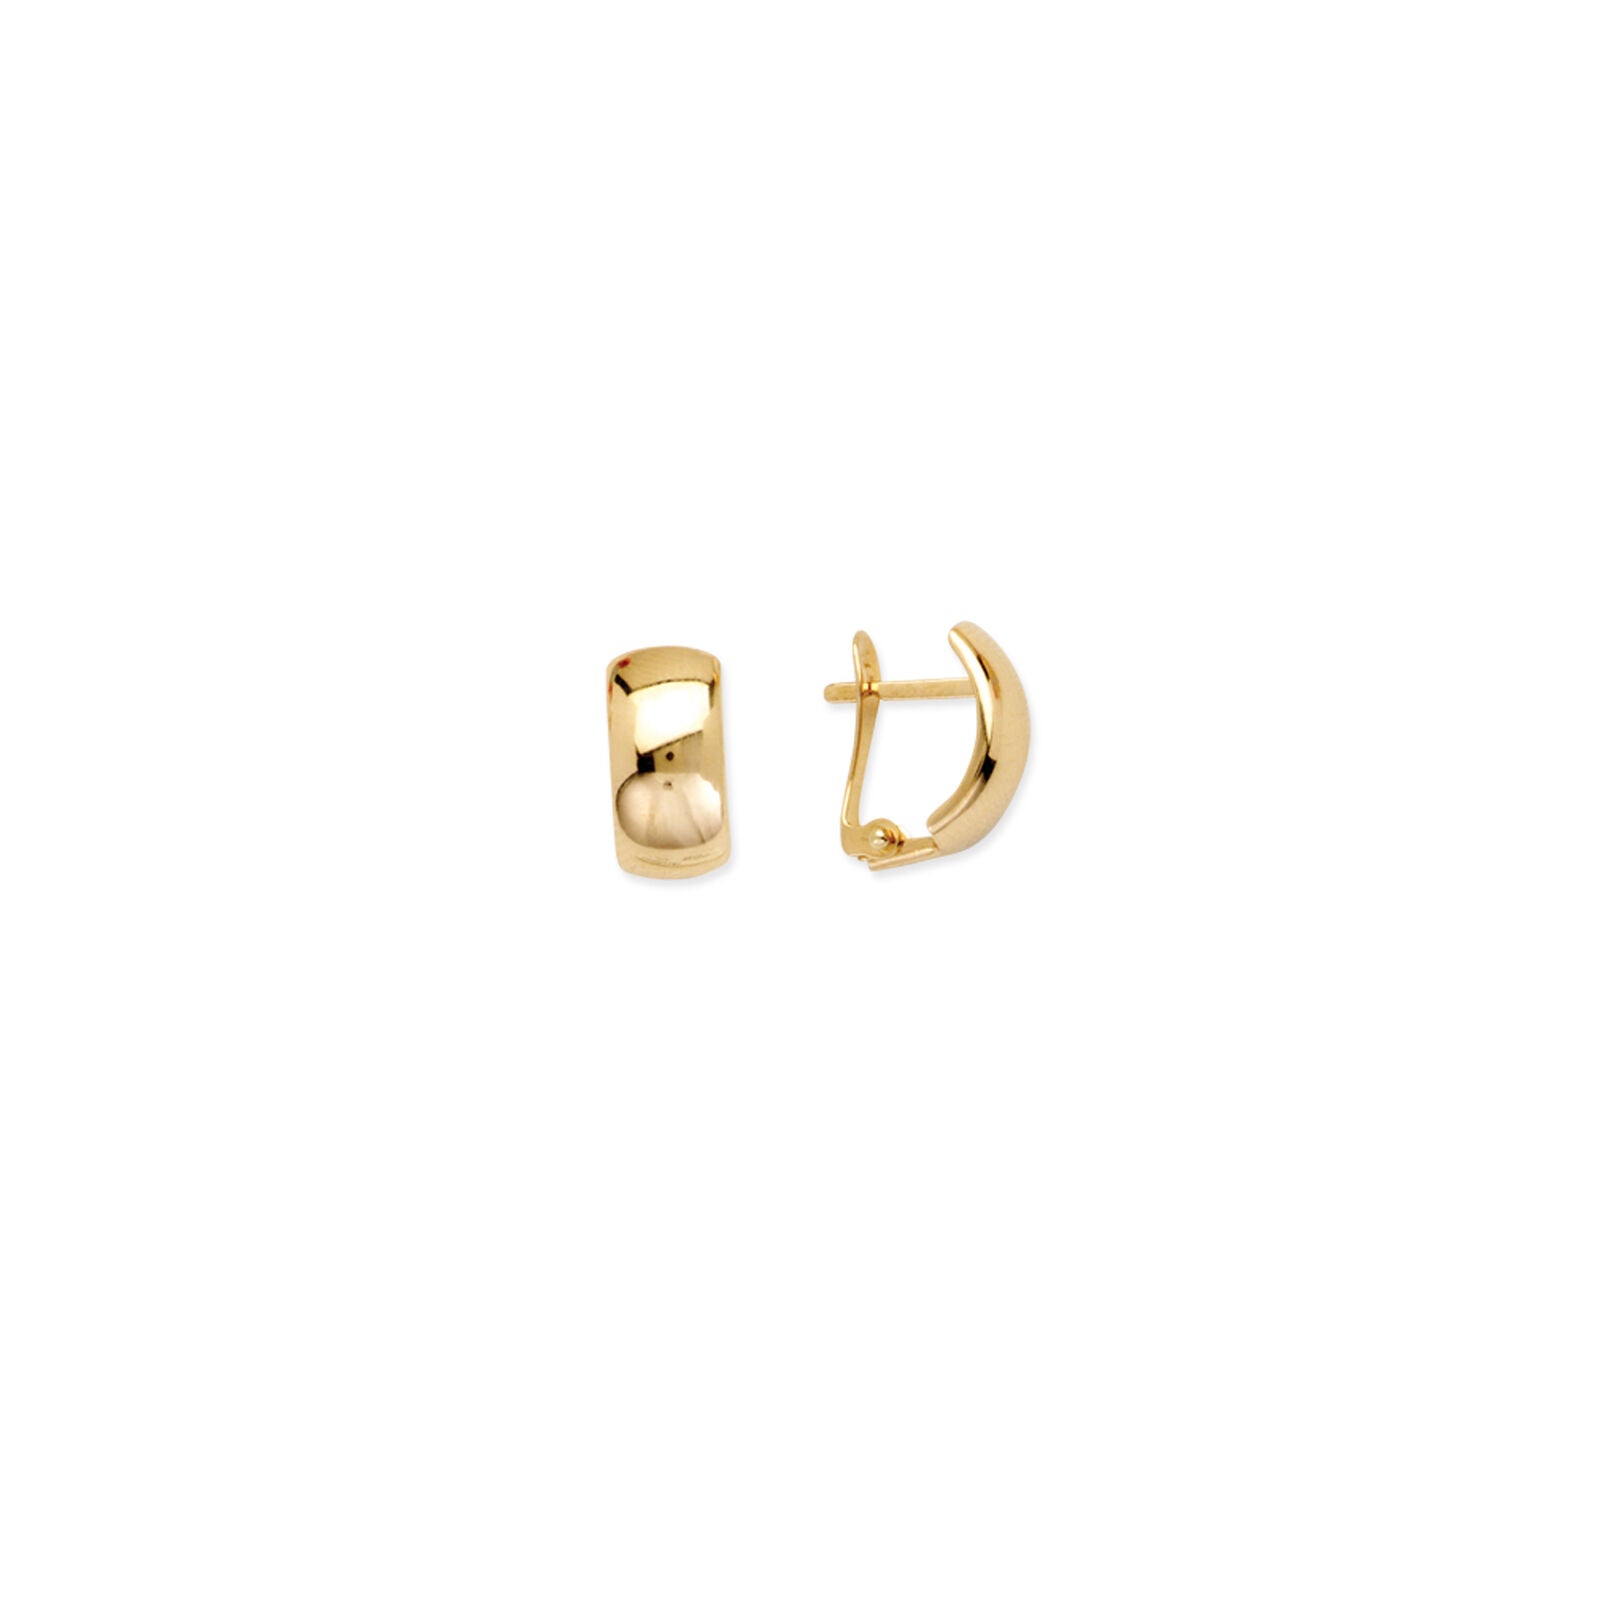 14k Real Solid Yellow Gold High Polished Earrings